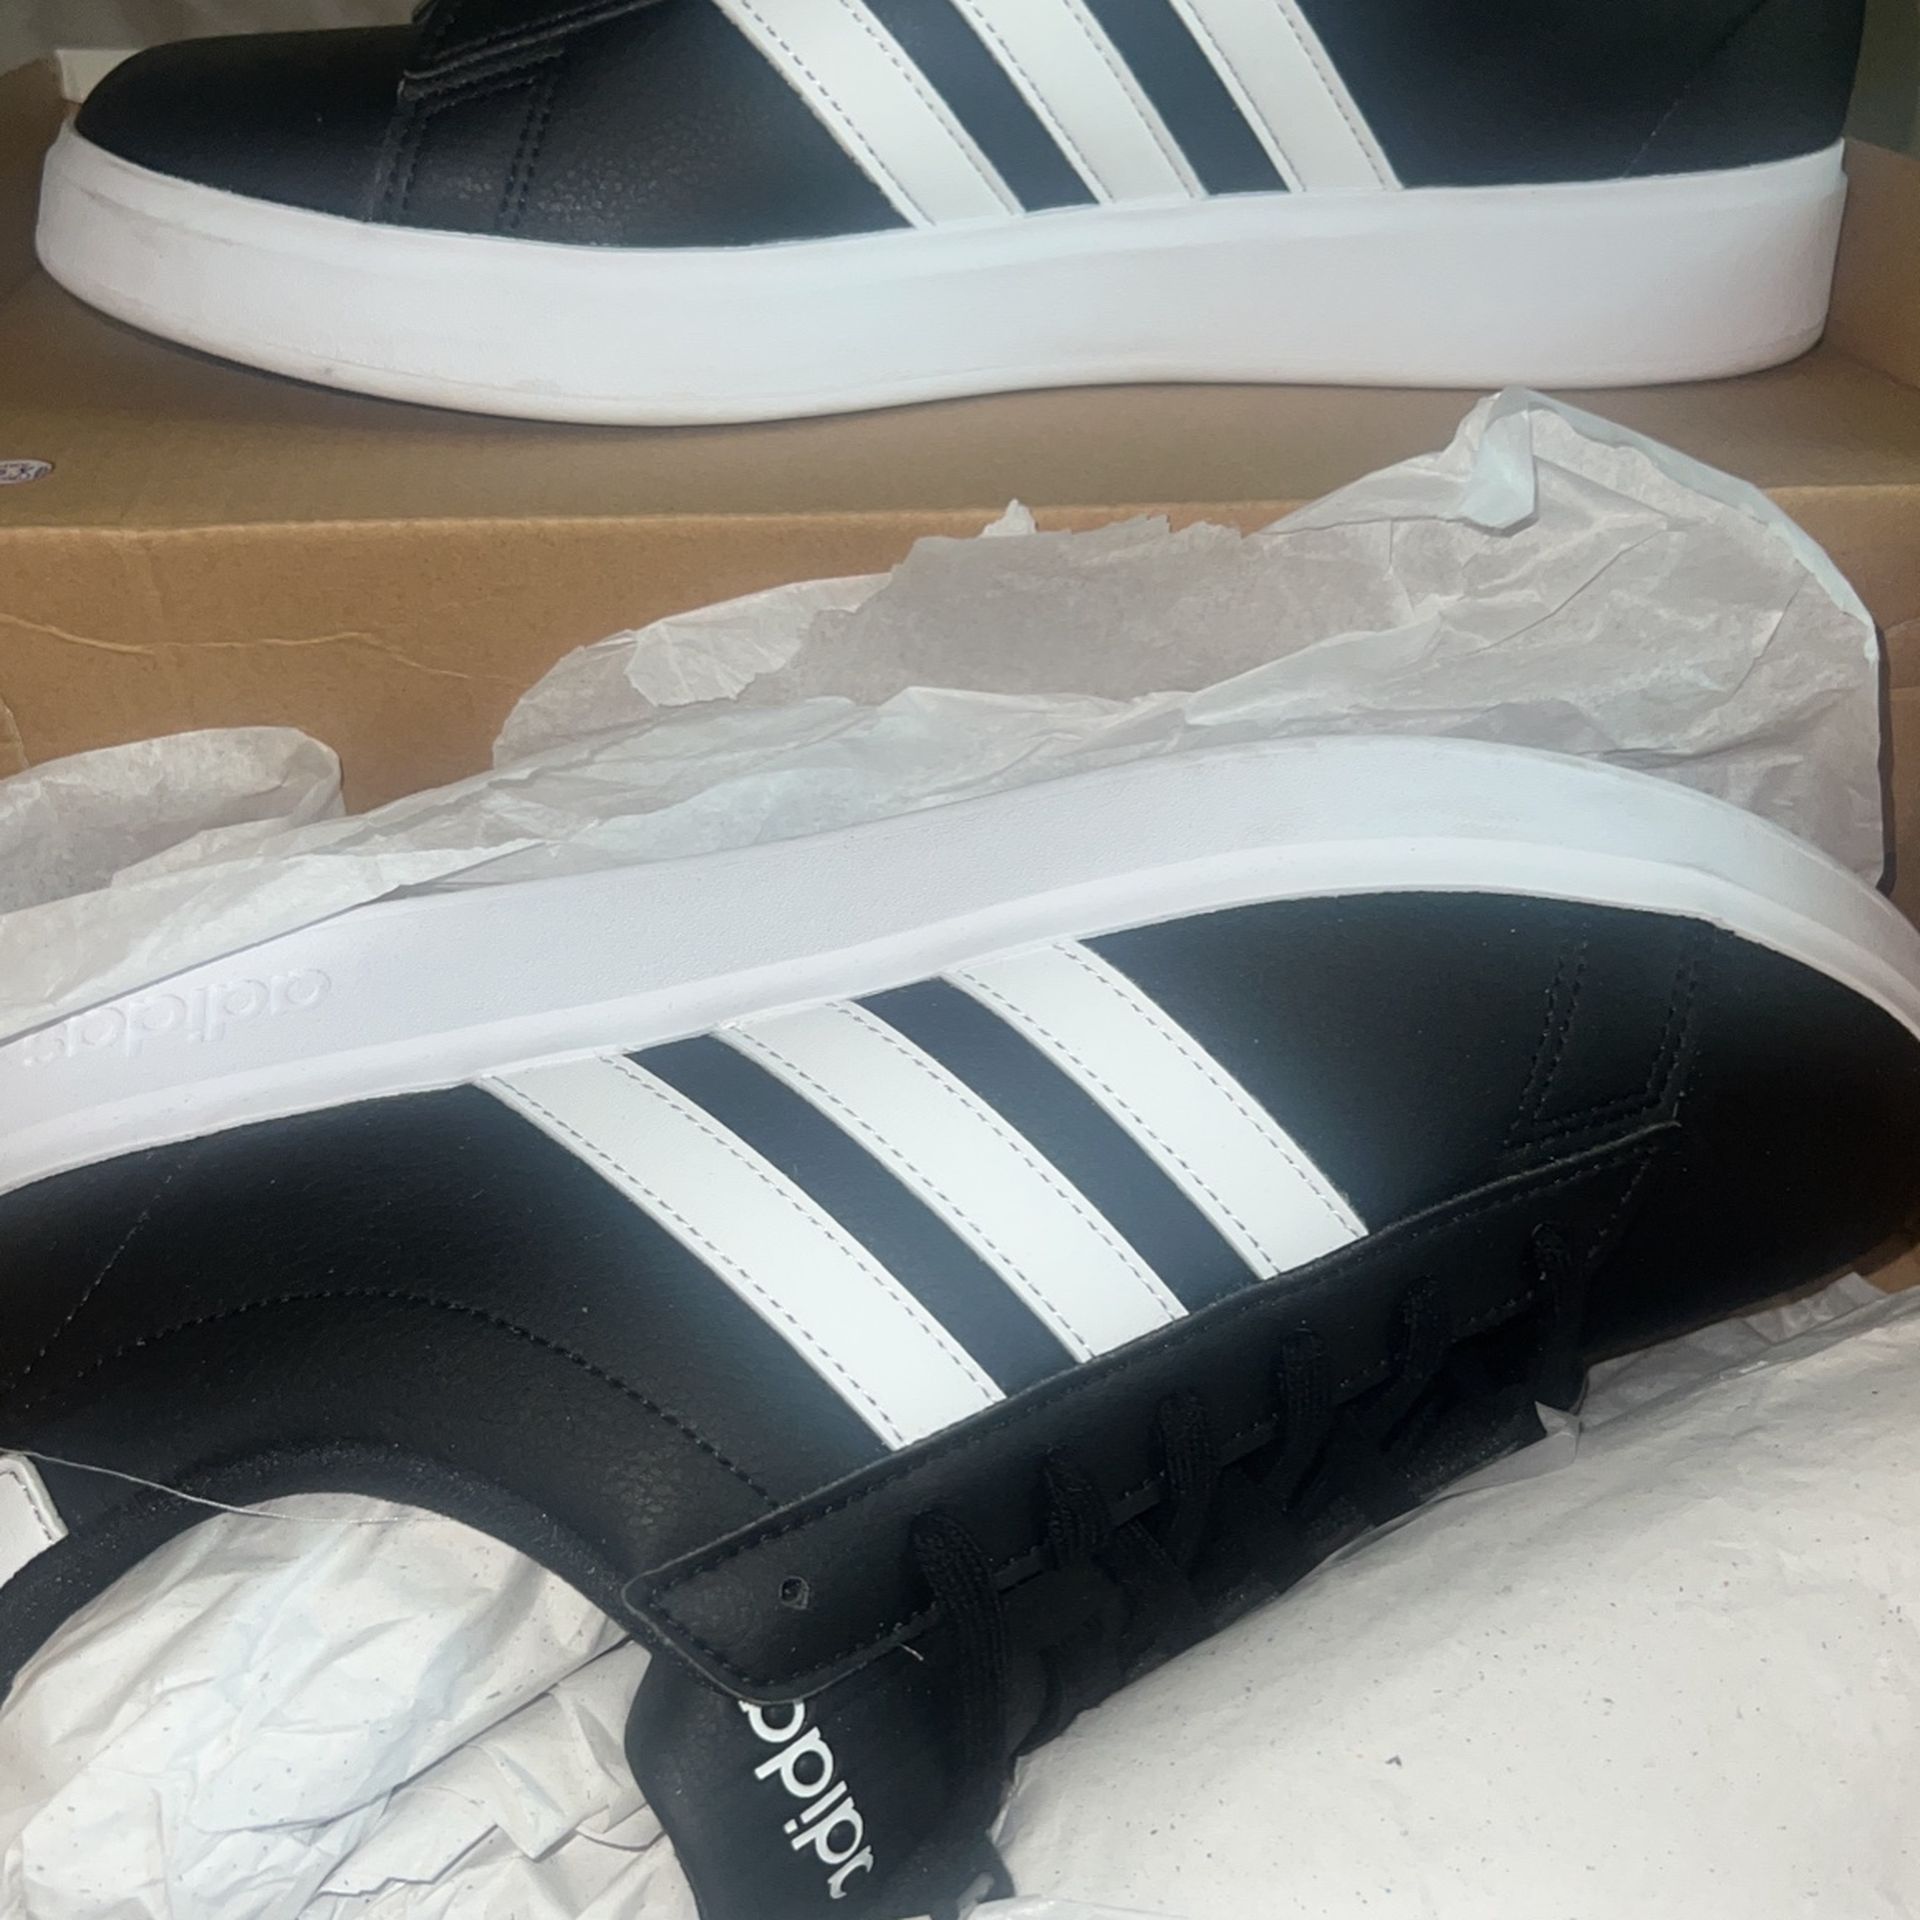 Adidas (Black and White) Tennis Shoes 